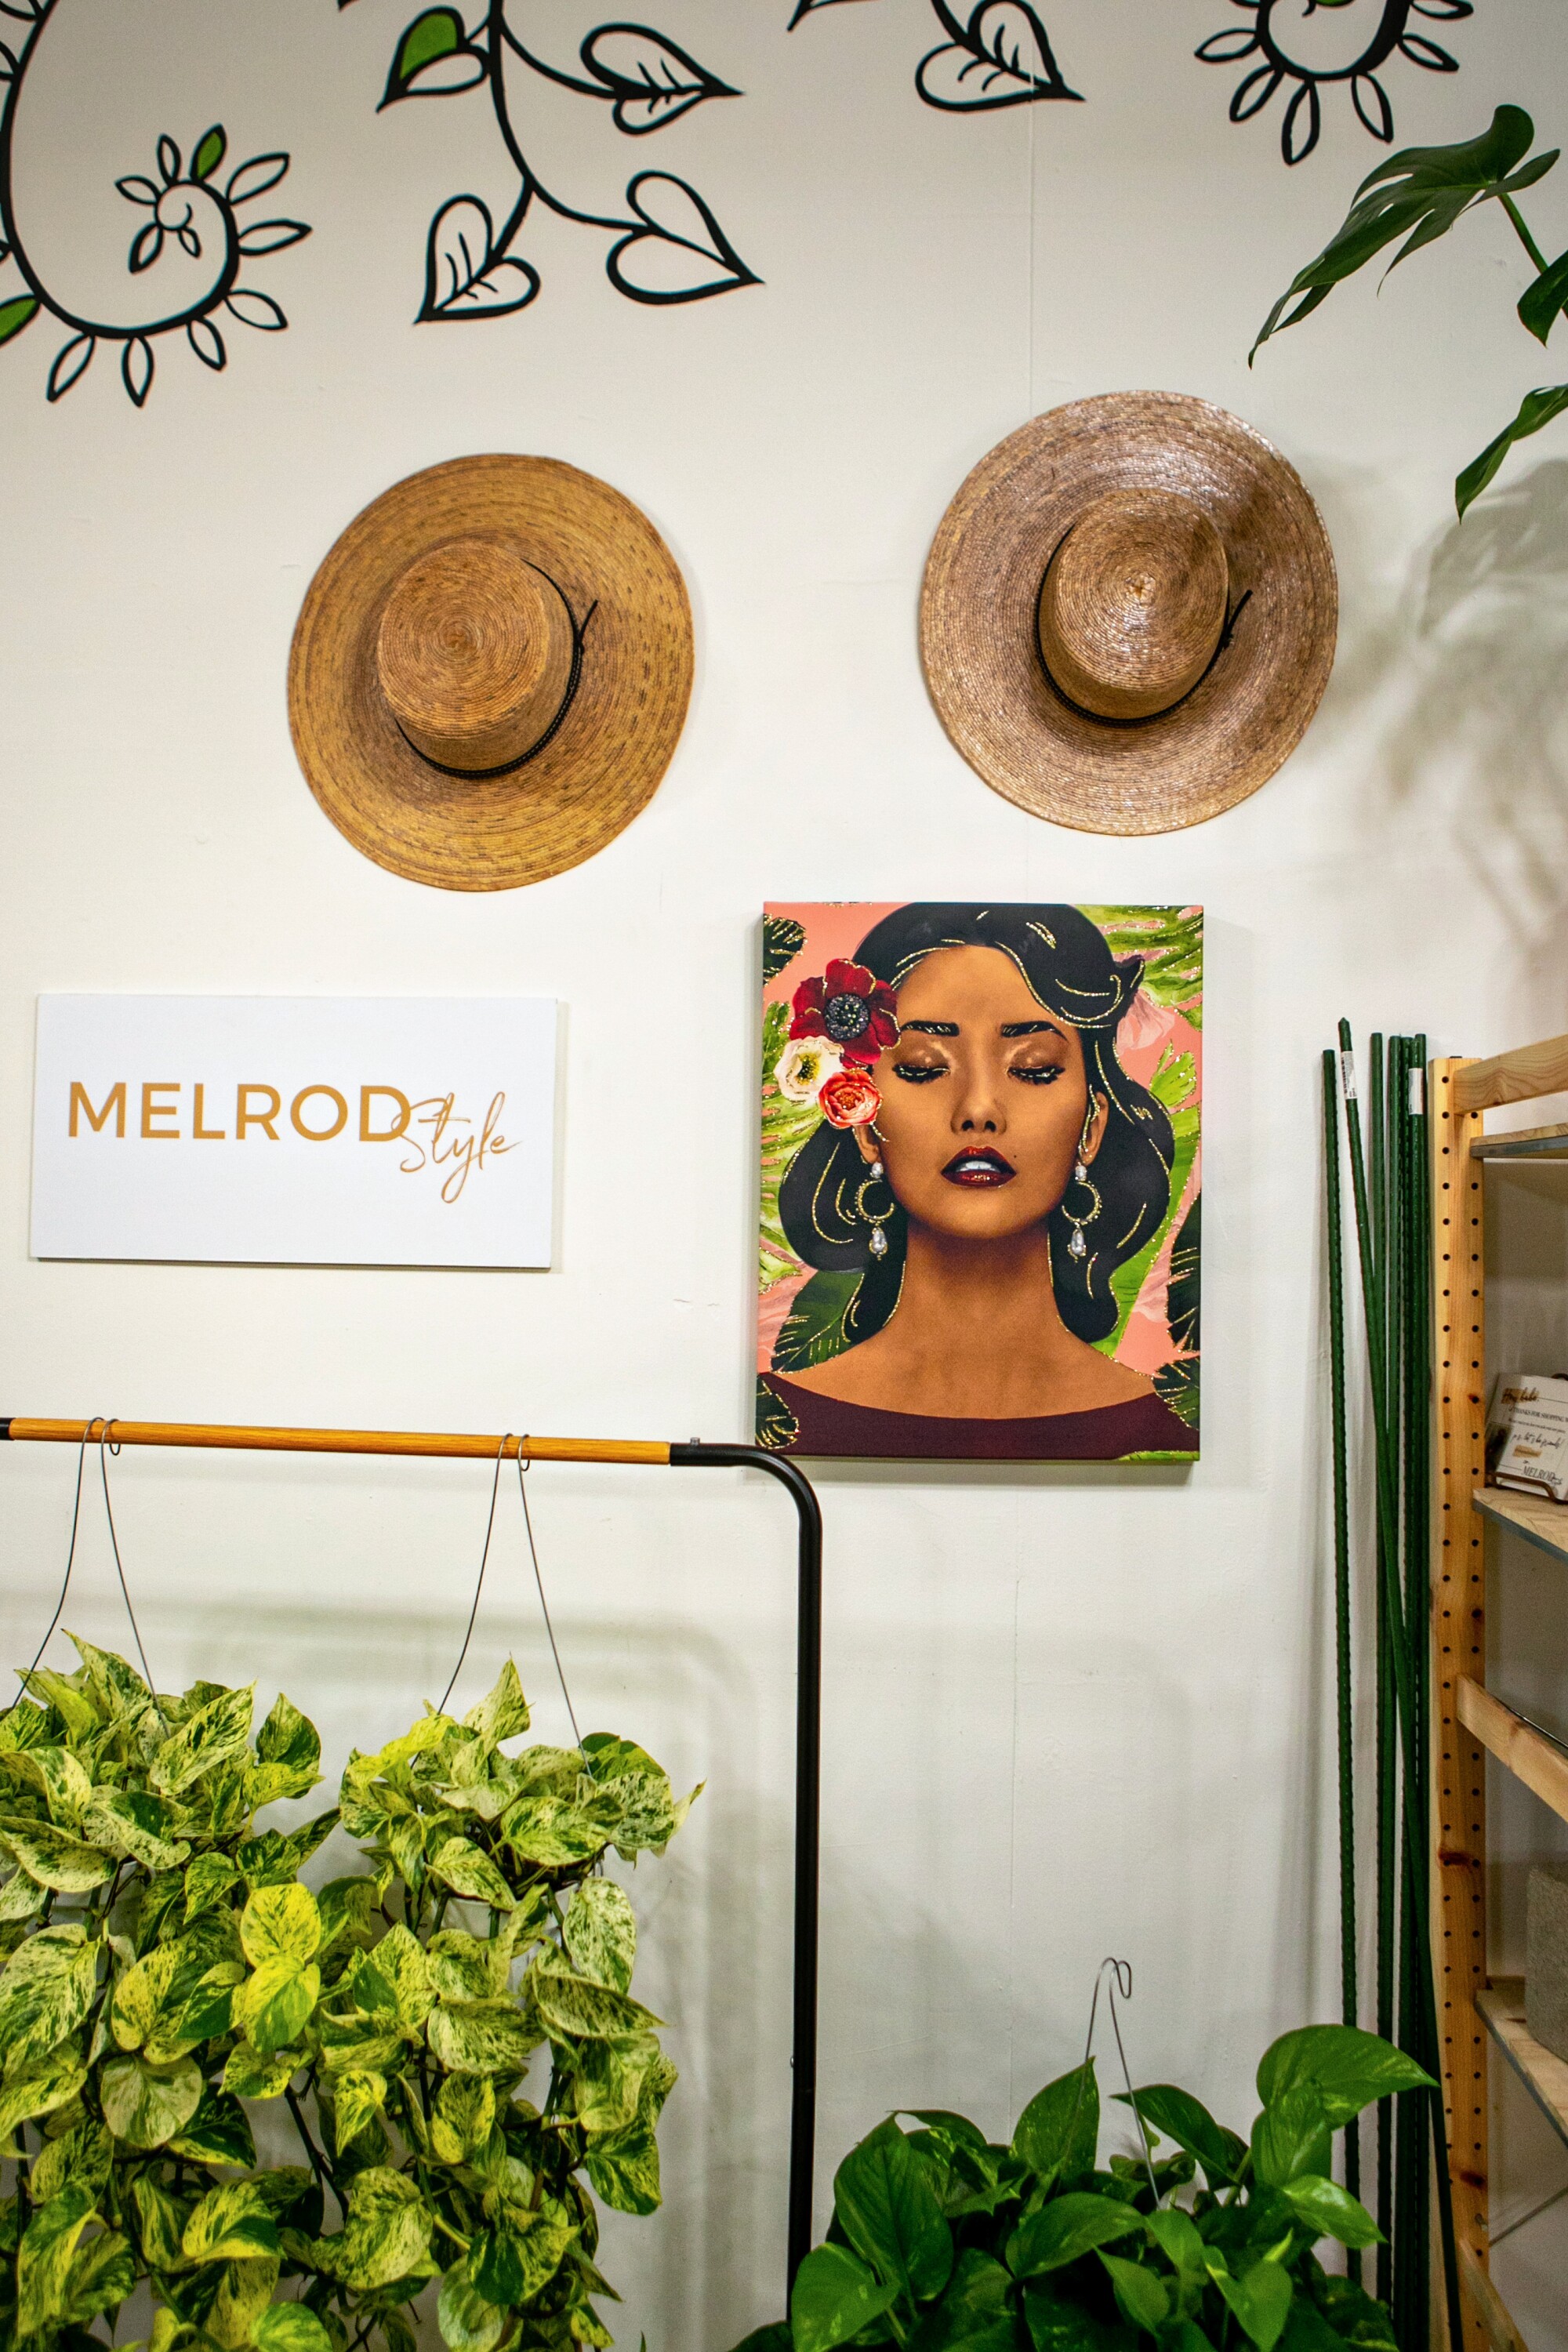 Two hats and a portrait of a woman hang on the wall above some potted plants. 